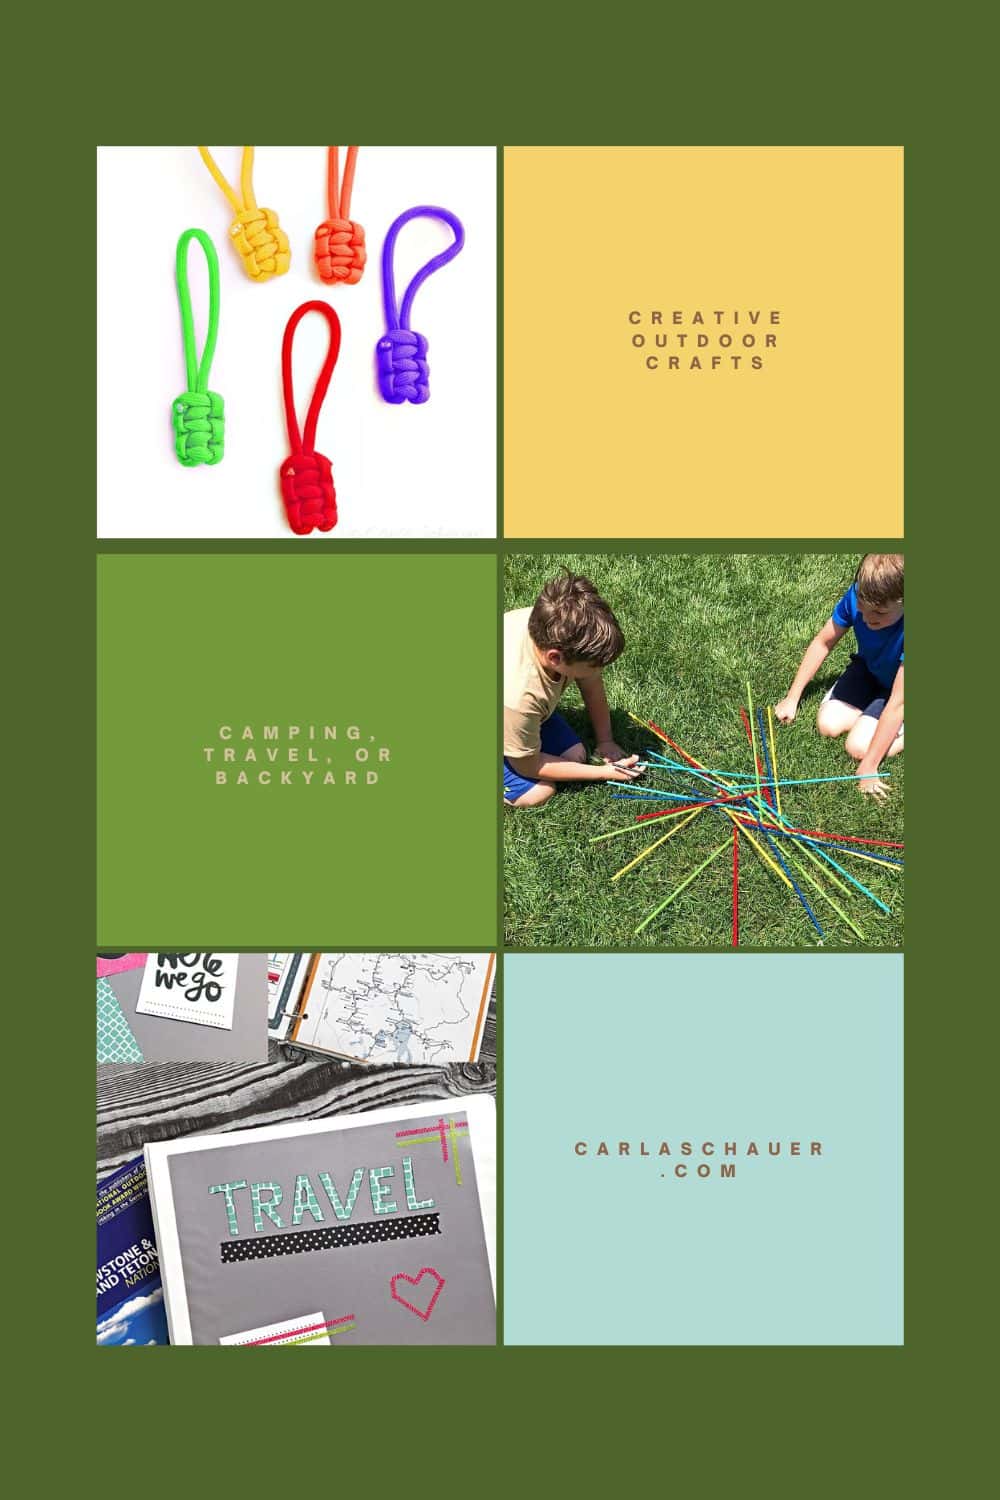 3 photos of camping and travel crafts, alternated on sides of images. Opposite solid color blocks in yellow, green, aqua have text that reads "creative outdoor crafts, camping, travel or backyard, carlaschauer.com"